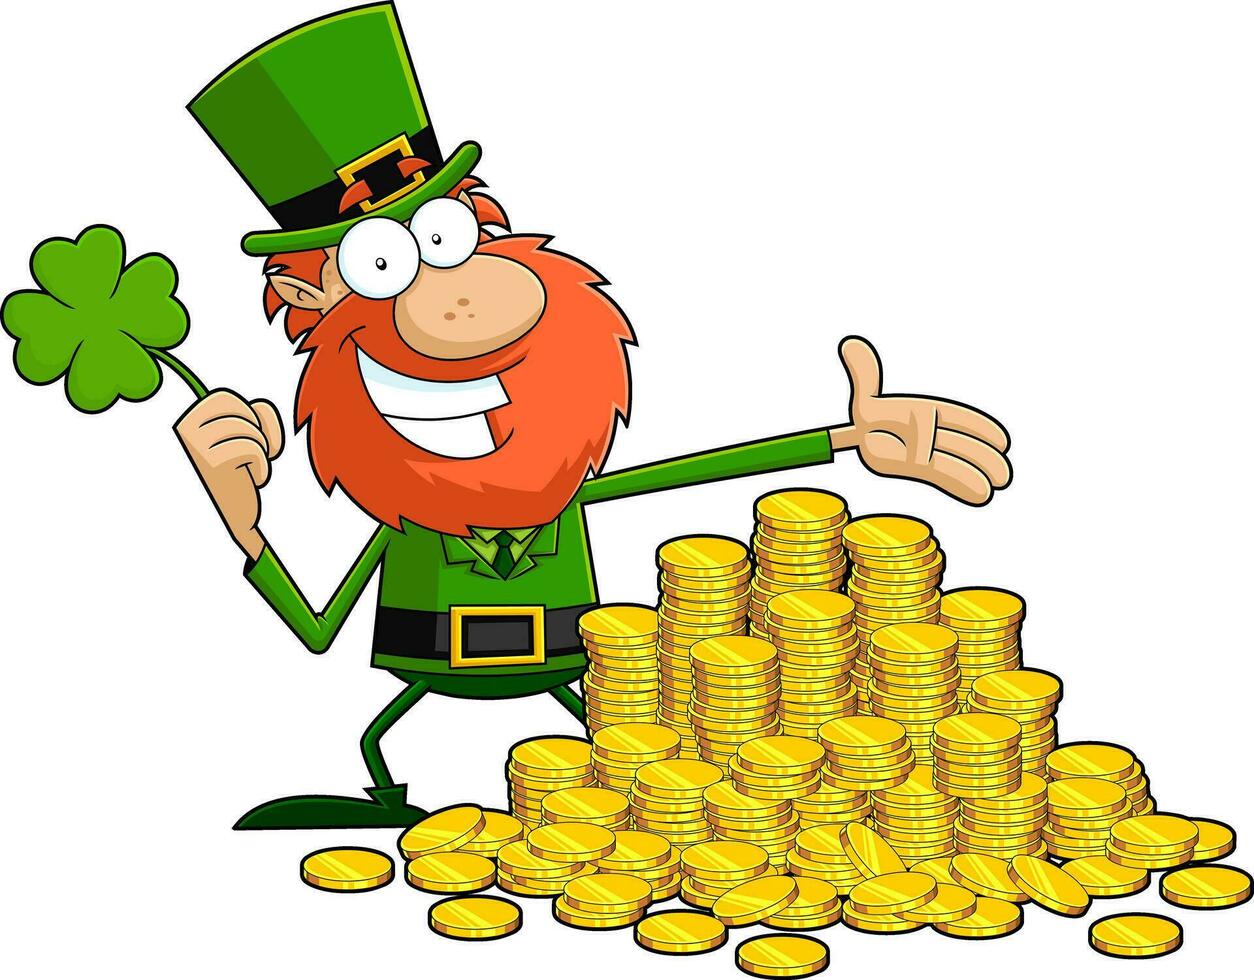 Smiling Leprechaun Cartoon Character With Shamrock And Pile Of Gold Coins vector